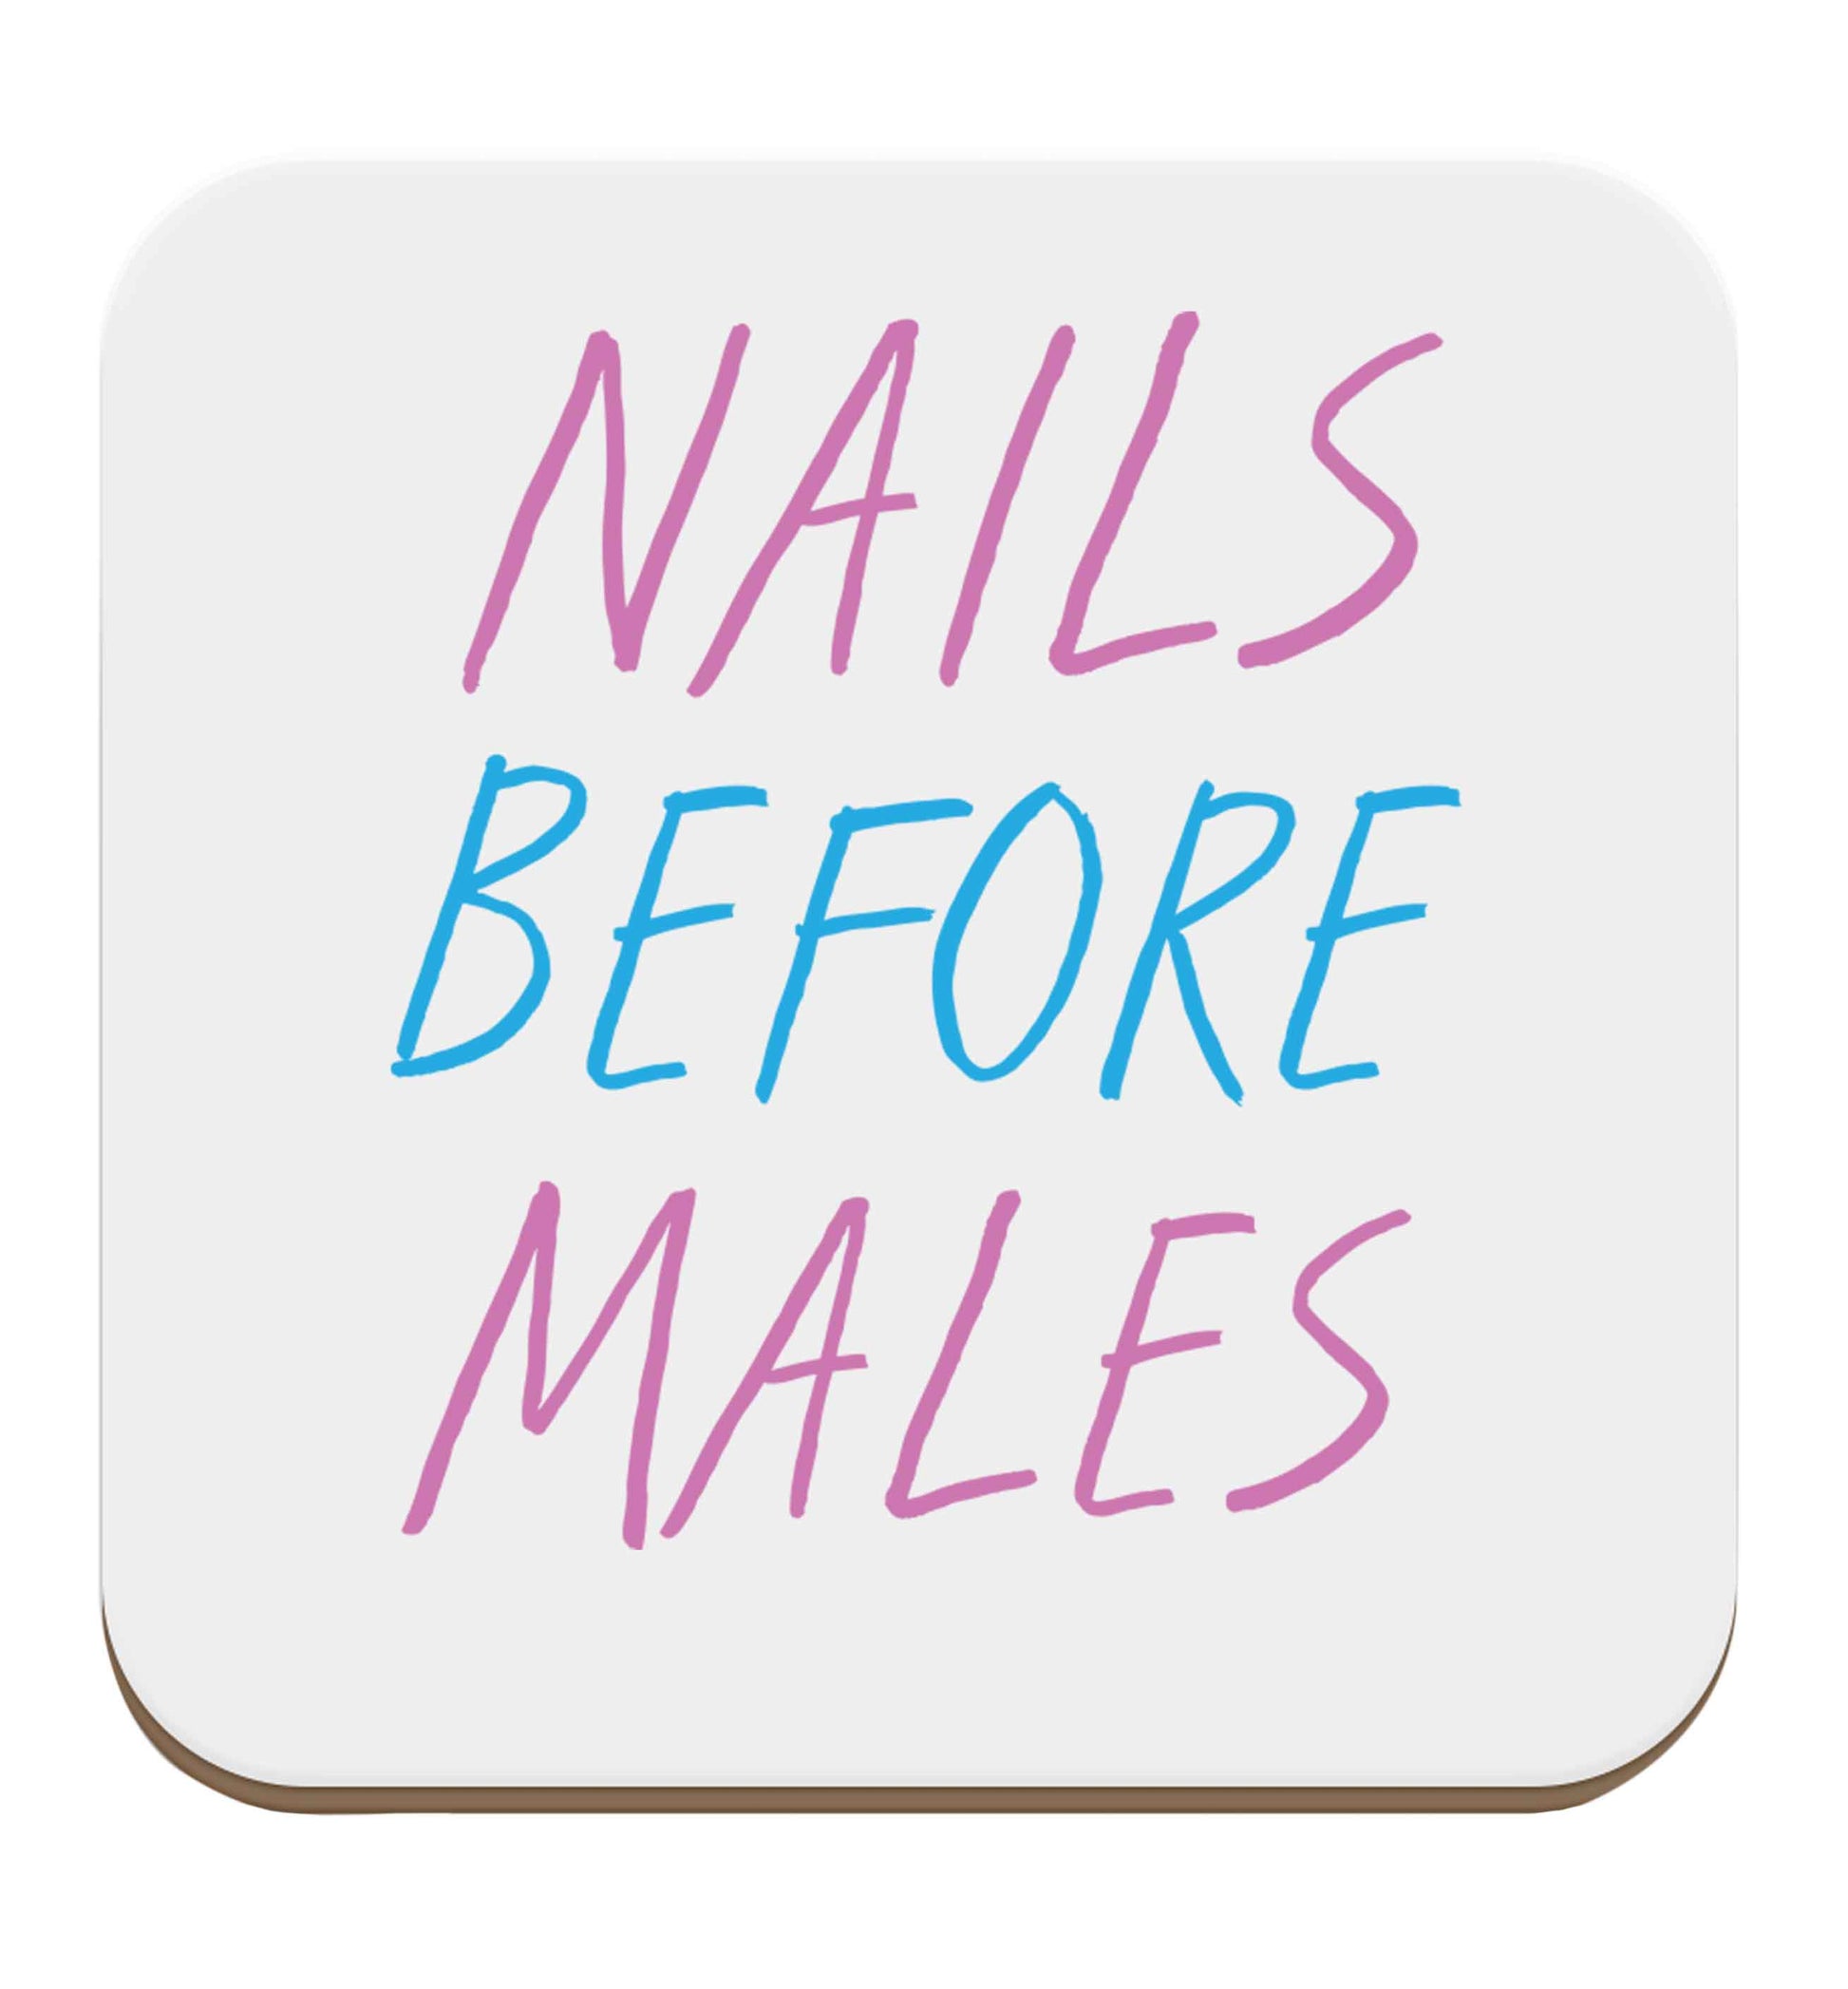 Nails before males set of four coasters